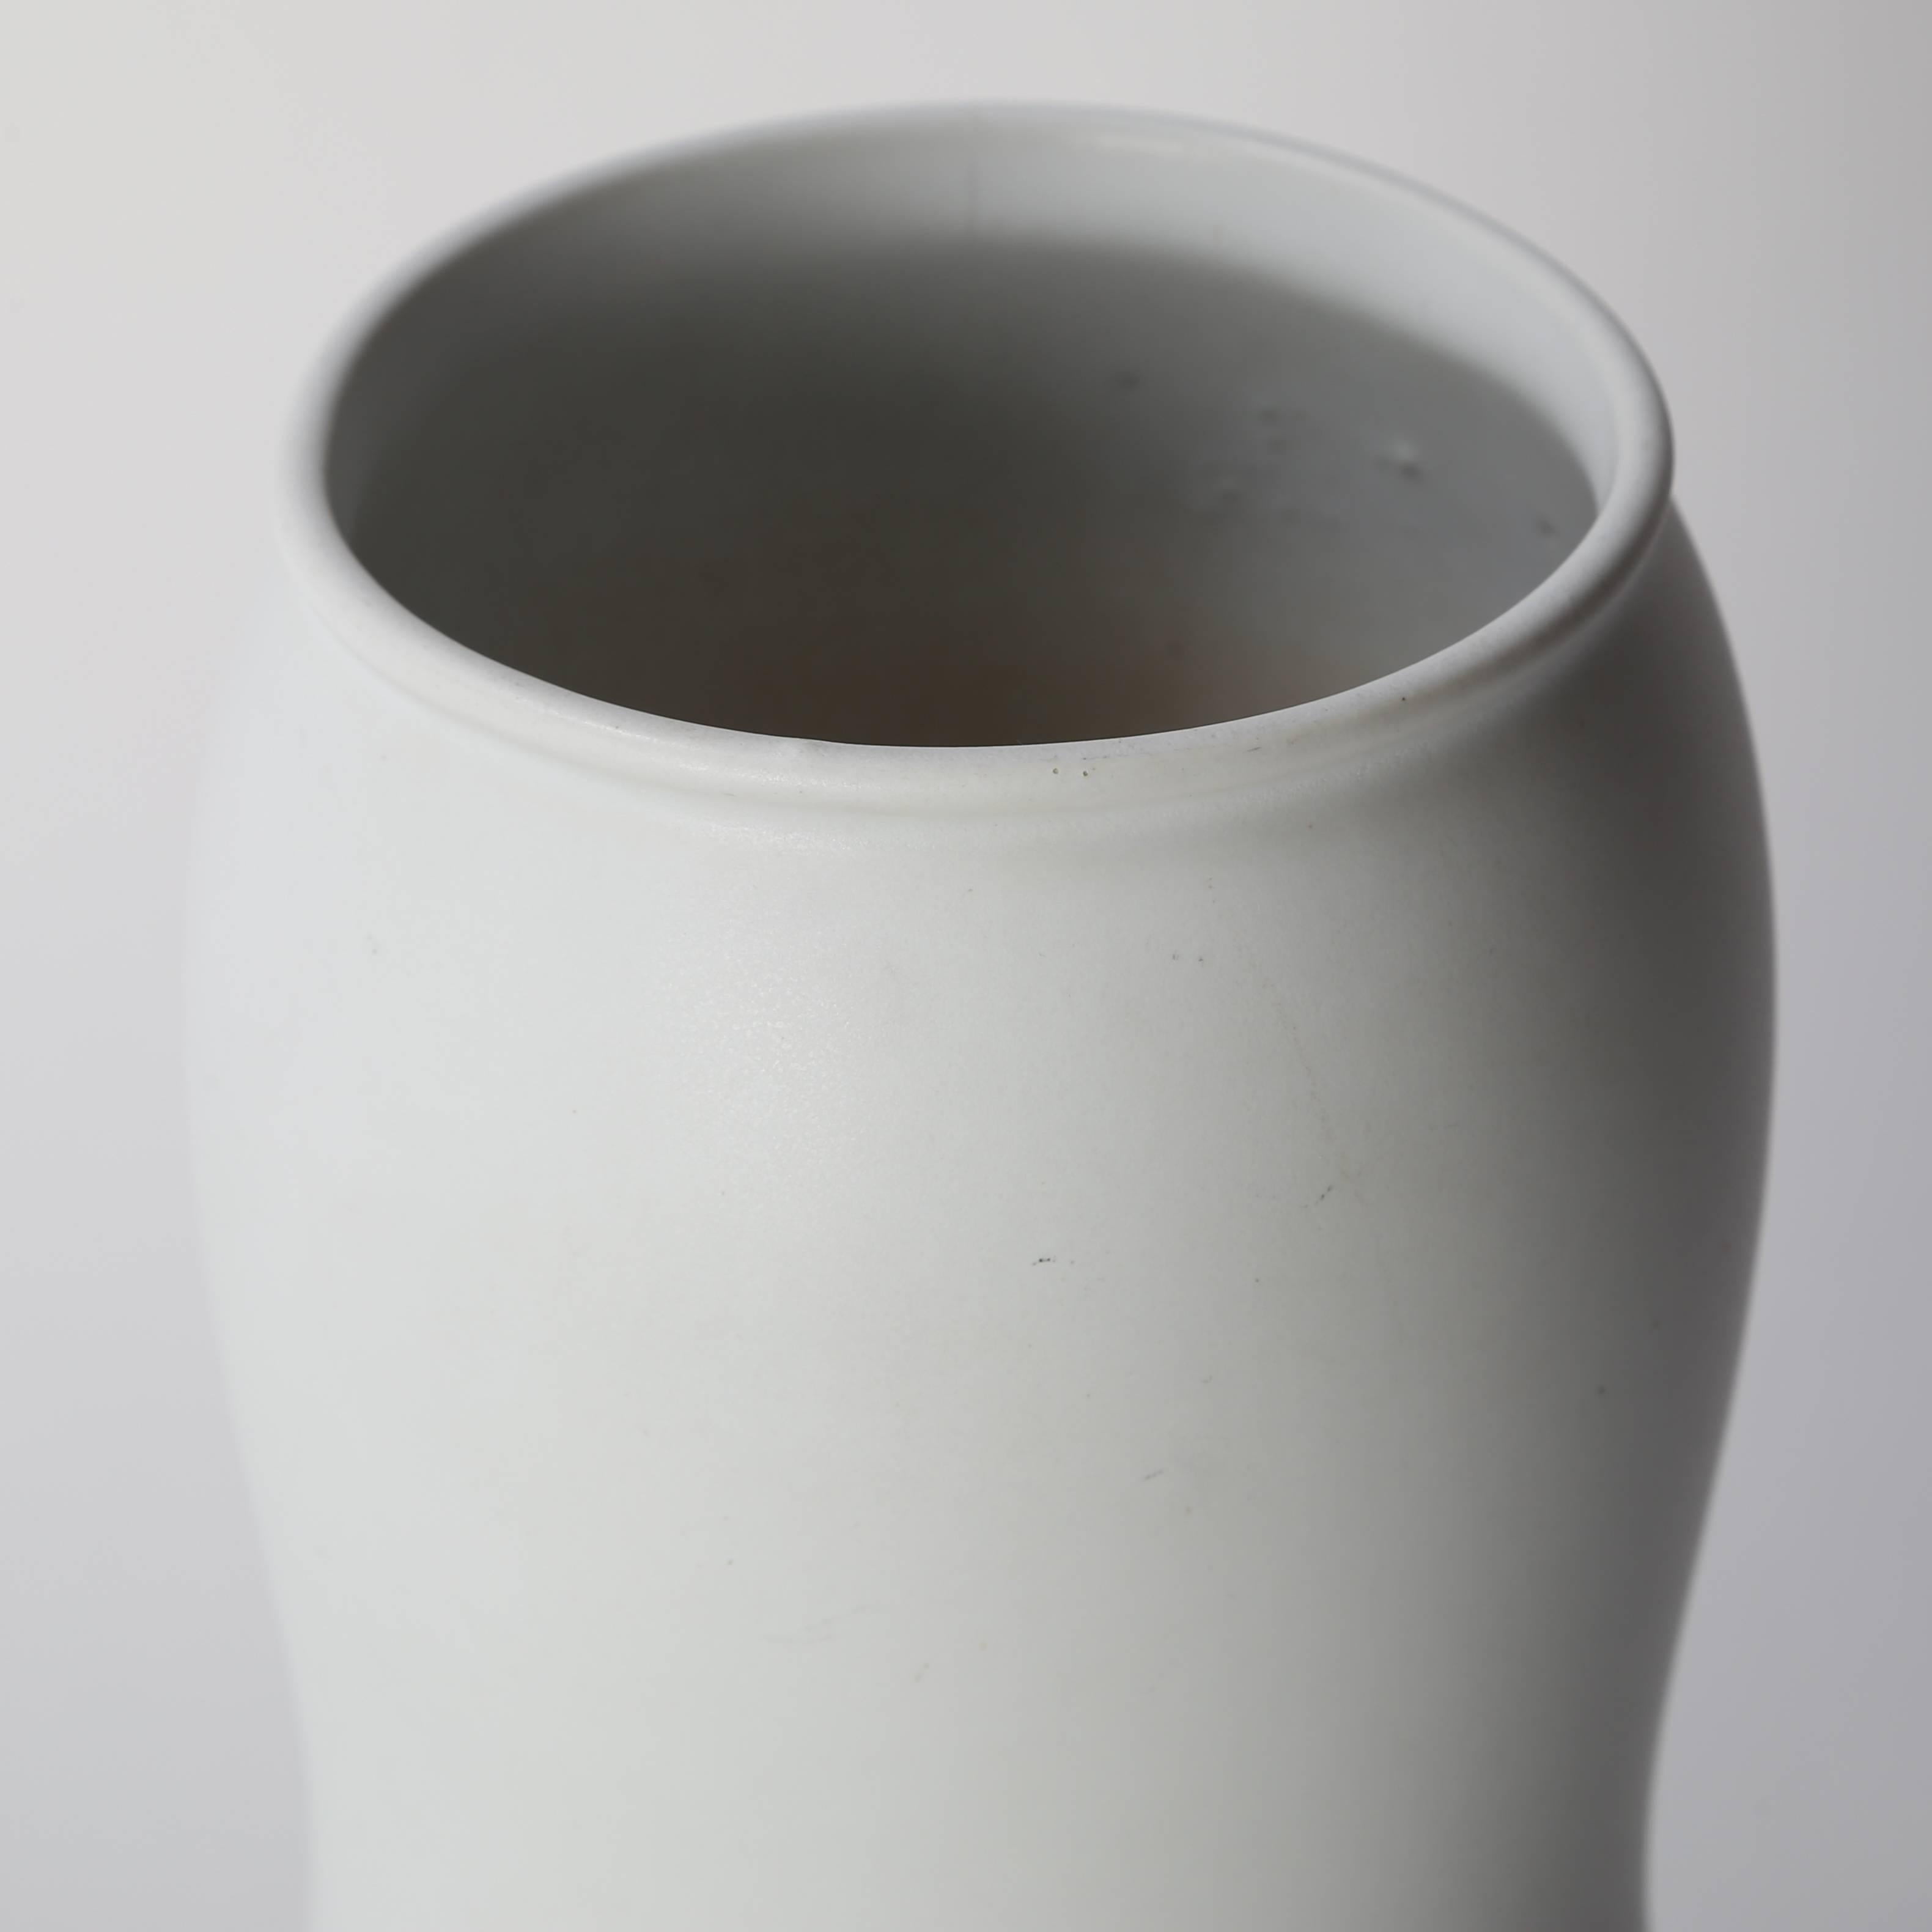 Beautiful round porcelain vase with a soft matte-white glaze designed by Stig Lindberg for Gustavsberg, circa 1950s. This example features a circular opening and gentle hourglass profile. We have several other white Gustavsberg pieces available. The